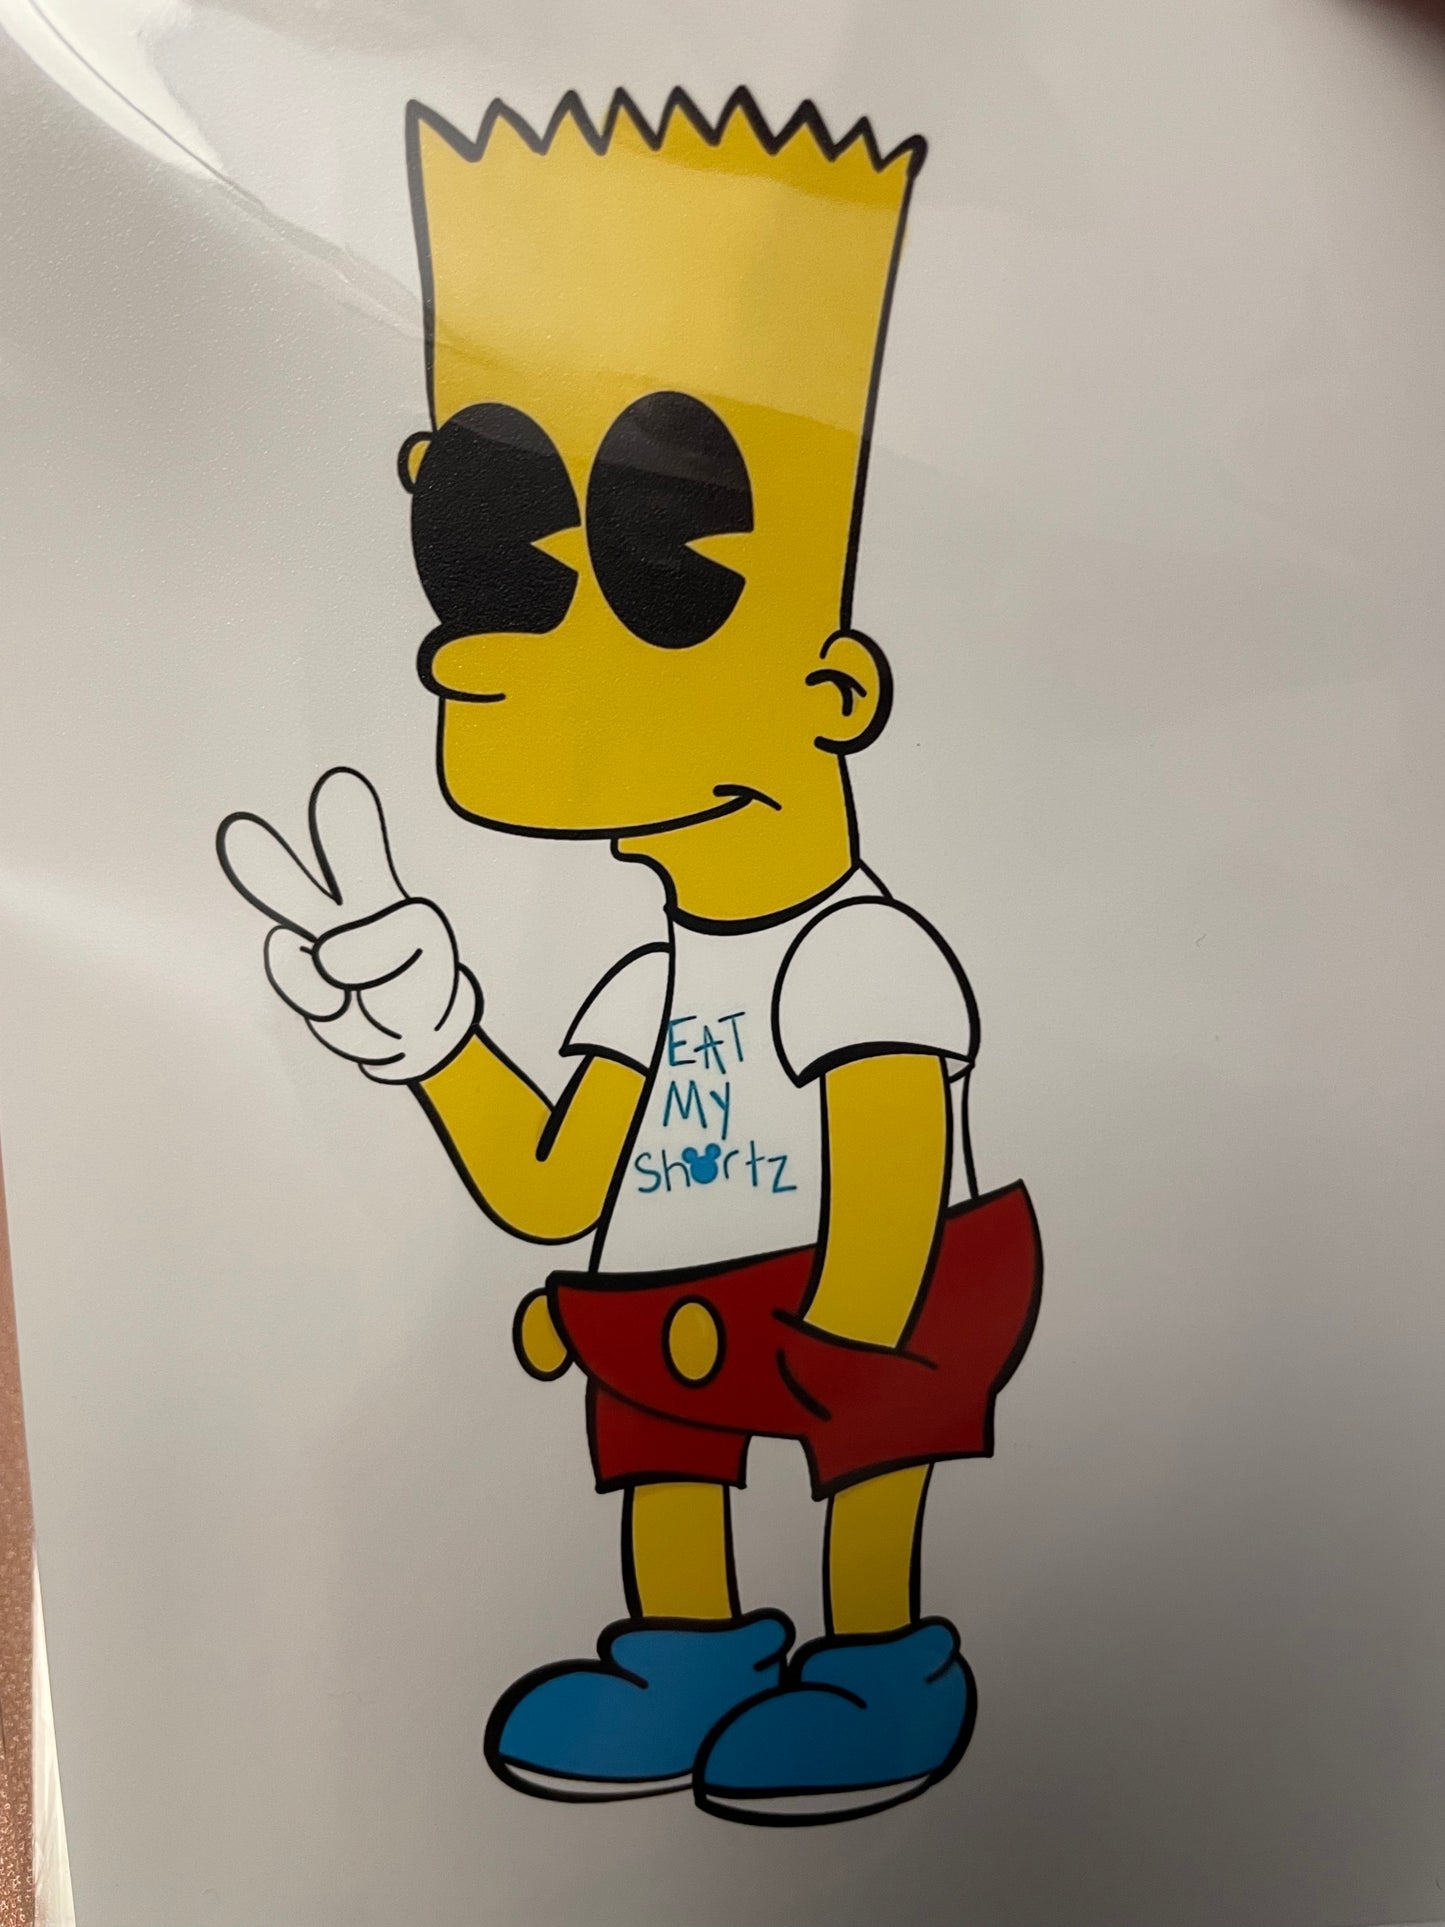 "Bart" by Haunted Haus